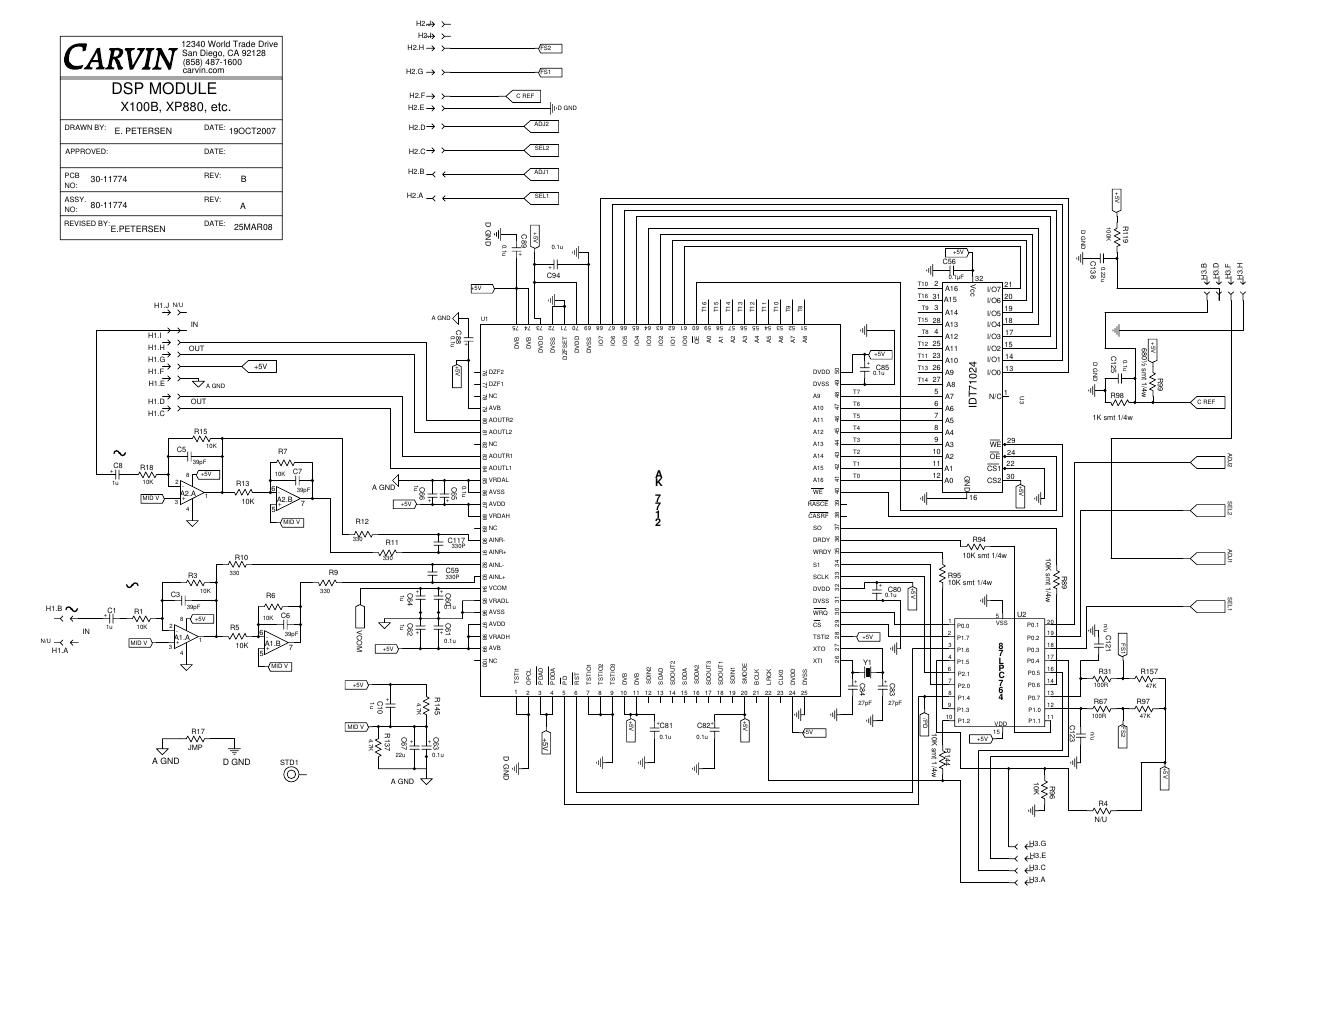 carvin xp series dsp schematic